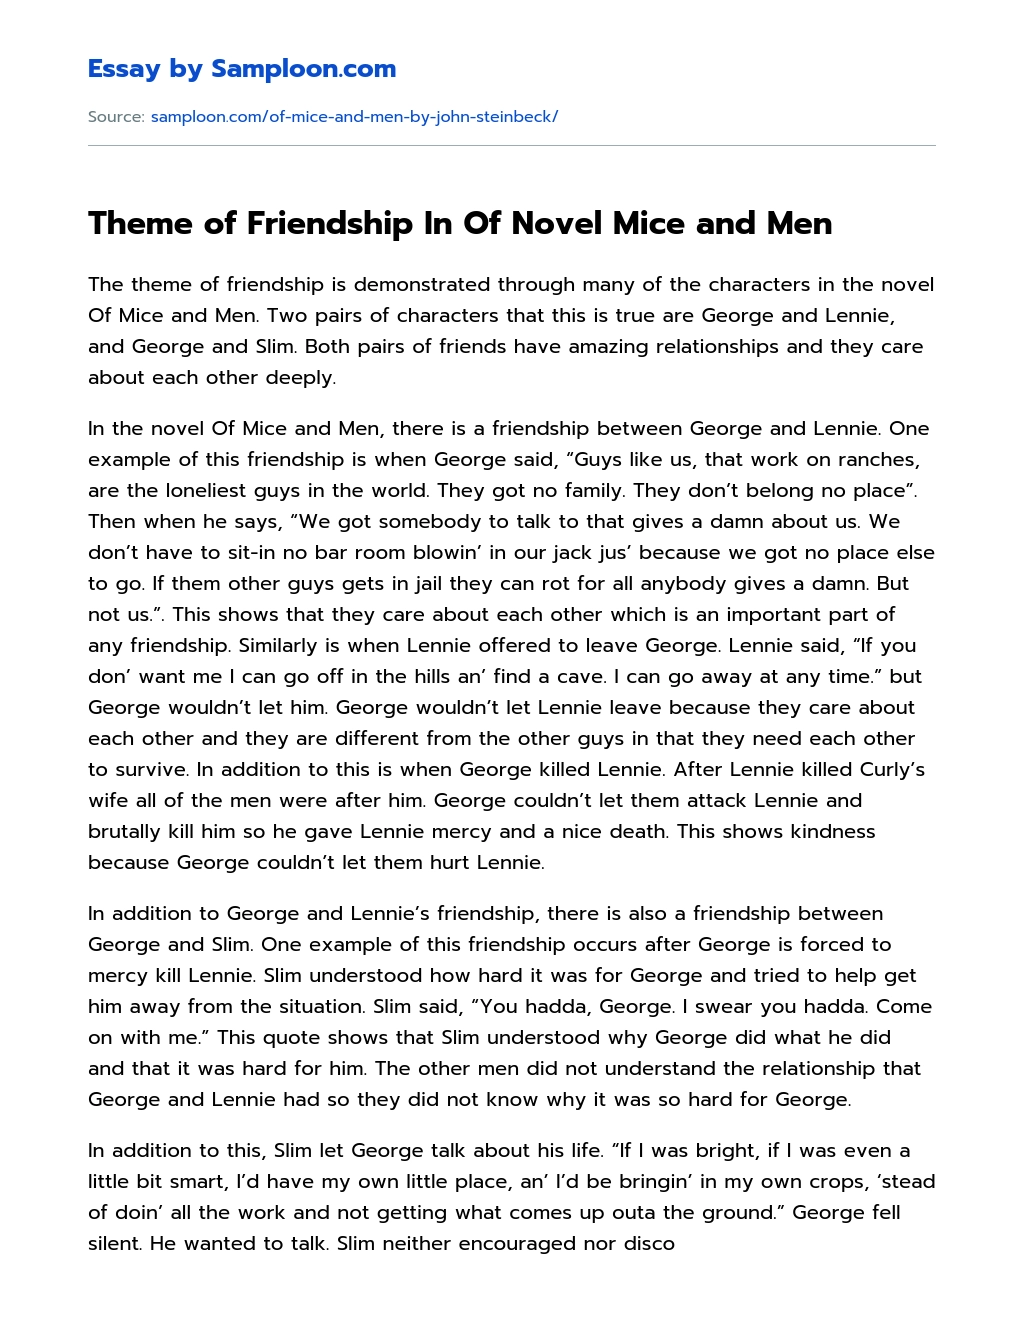 Theme of Friendship In Of Novel Mice and Men Review essay